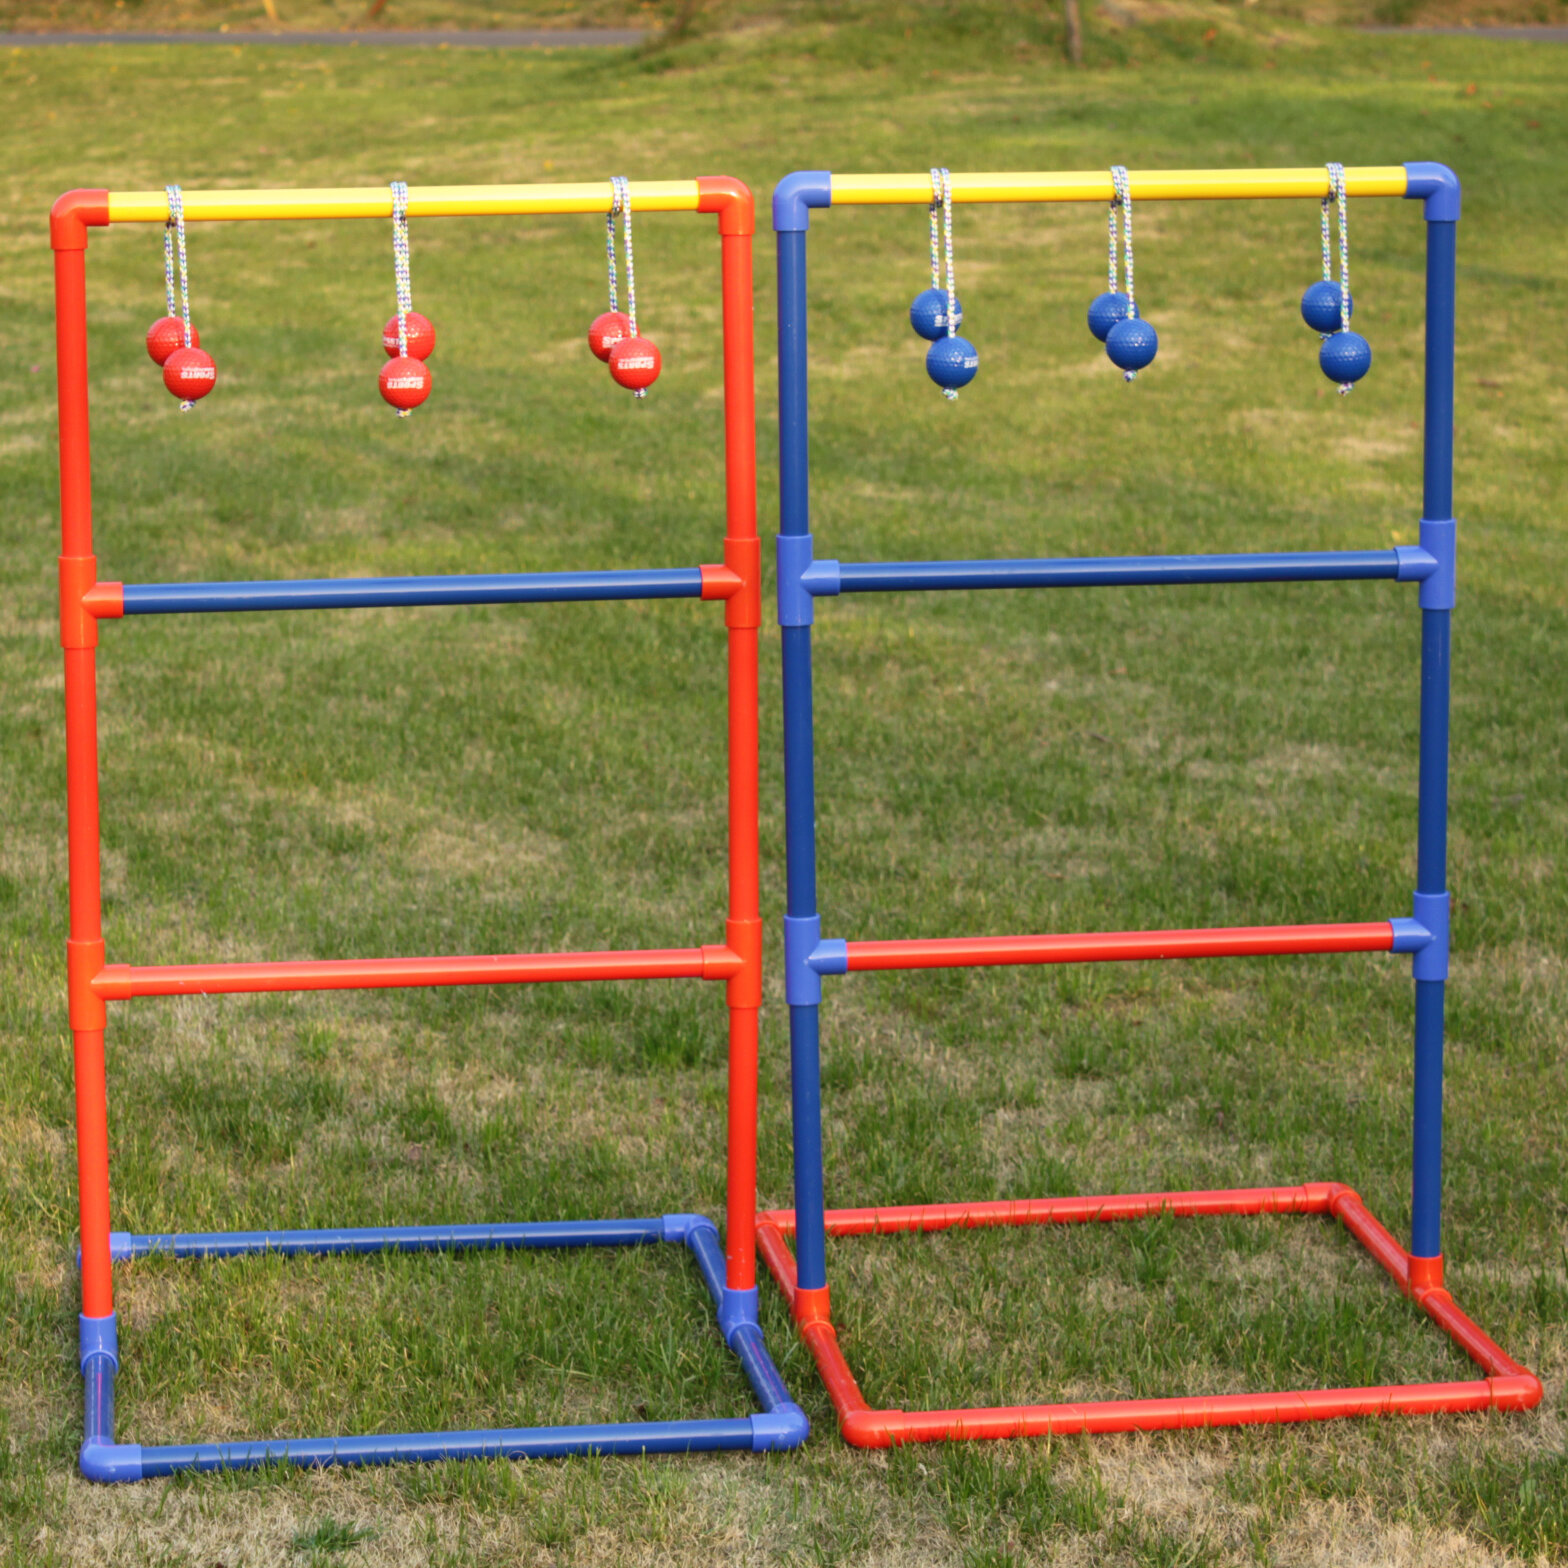 for Parties Tailgates Camping Carrying Case and Score Trackers JOYMOR Upgraded Ladder Toss Game Set Metal Ladder Ball Game Set with 6 Bolo Balls 